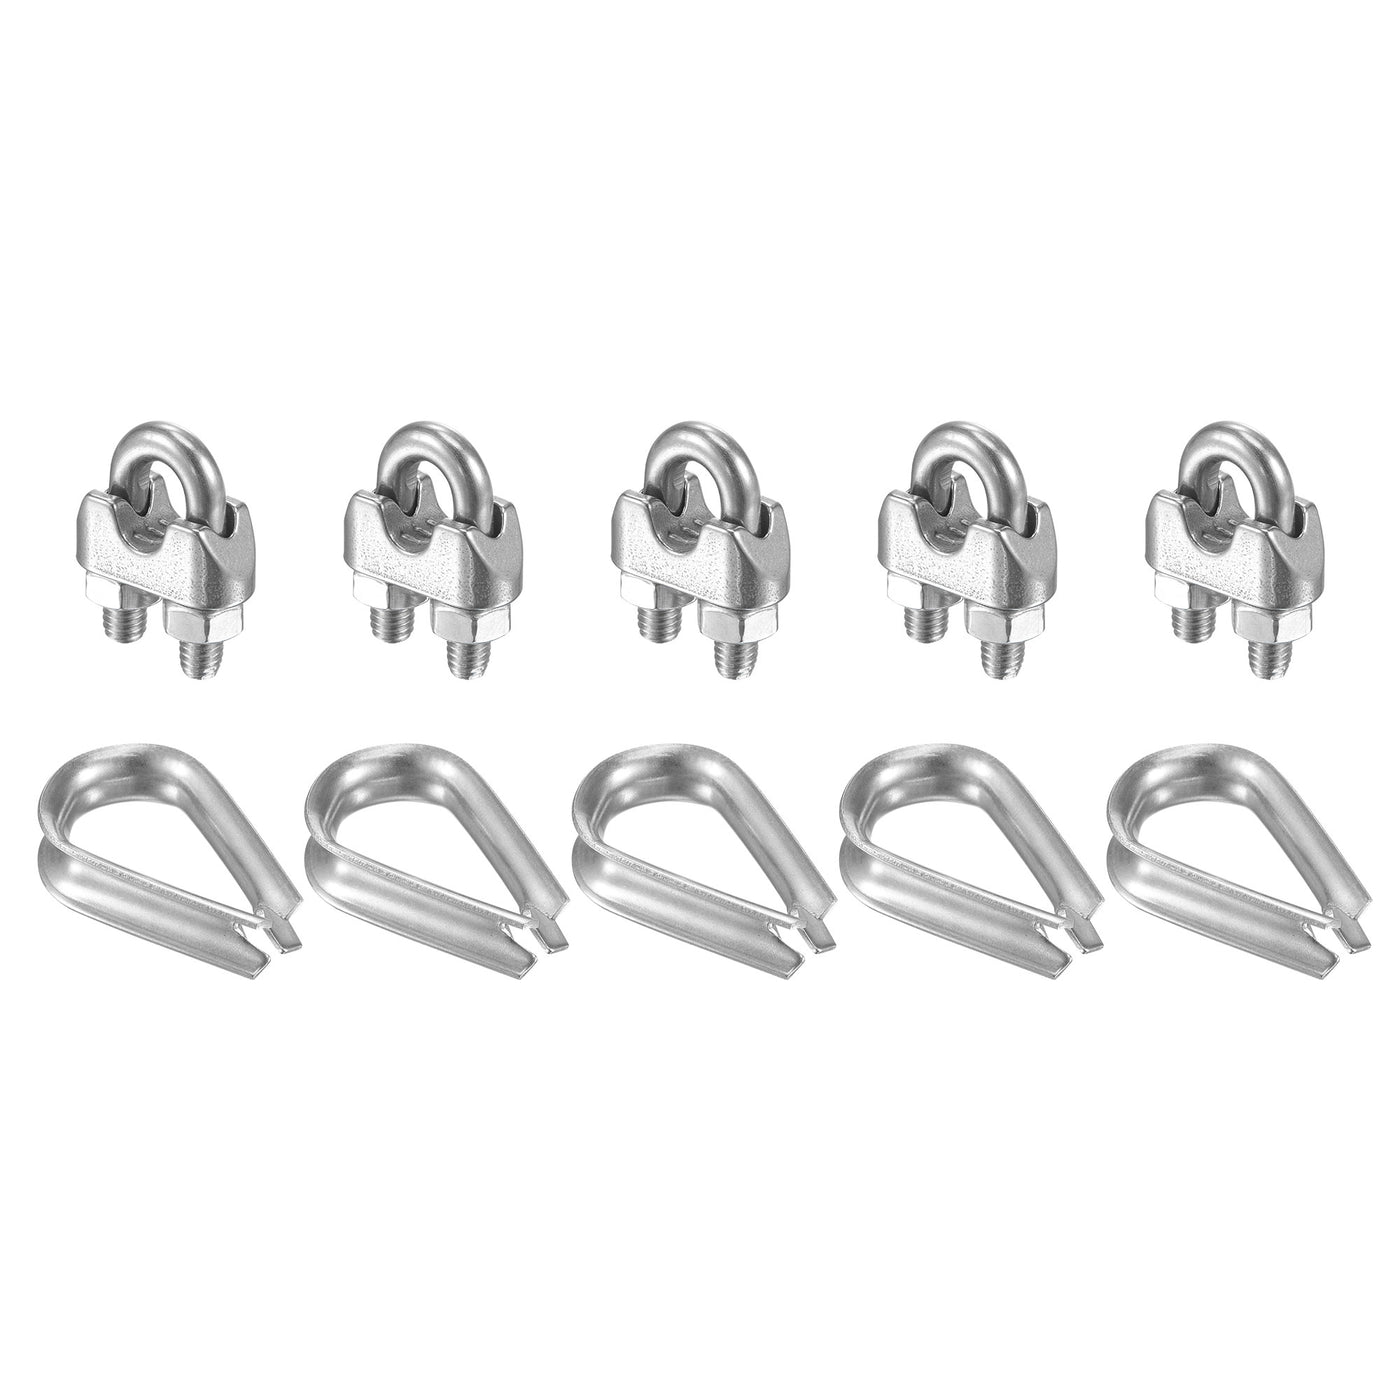 uxcell Uxcell Wire Rope Cable Clip Kit for M6, Included Rope Clamp 5Pcs and Thimble Rigging 5Pcs, 304 Stainless Steel U Bolt Saddle Fastener